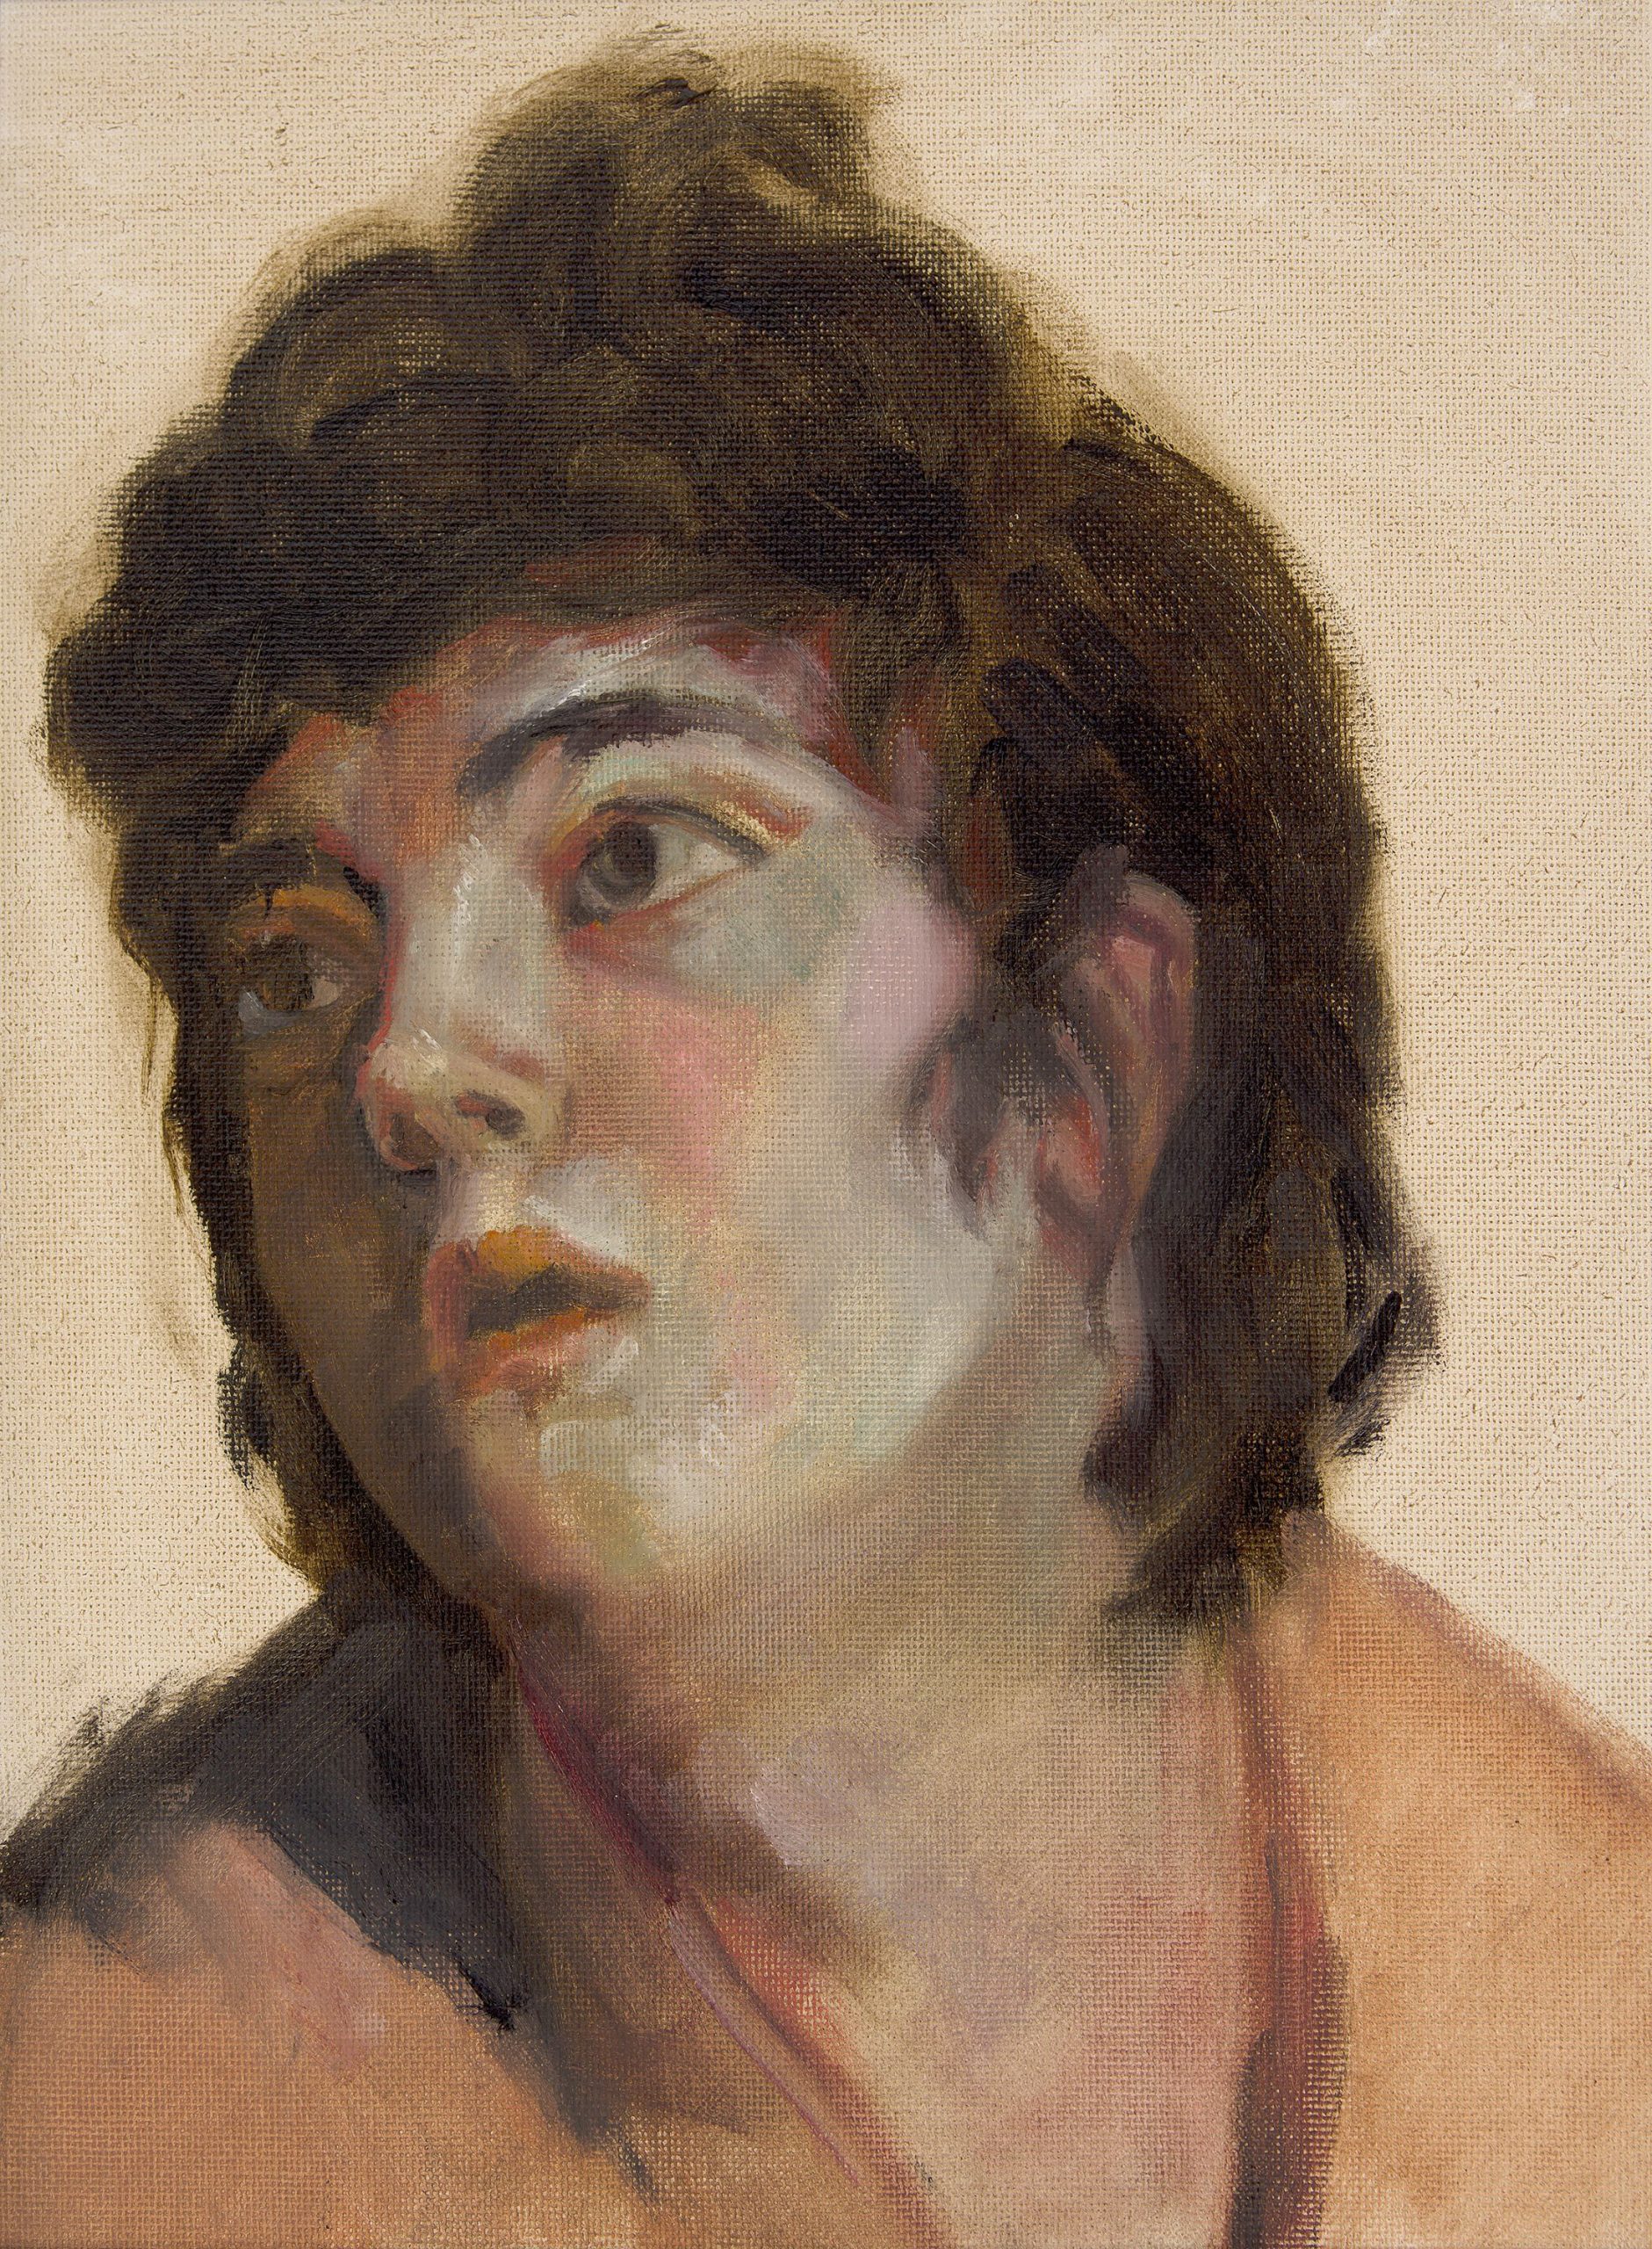 Painting of a person with a yearning look on their face